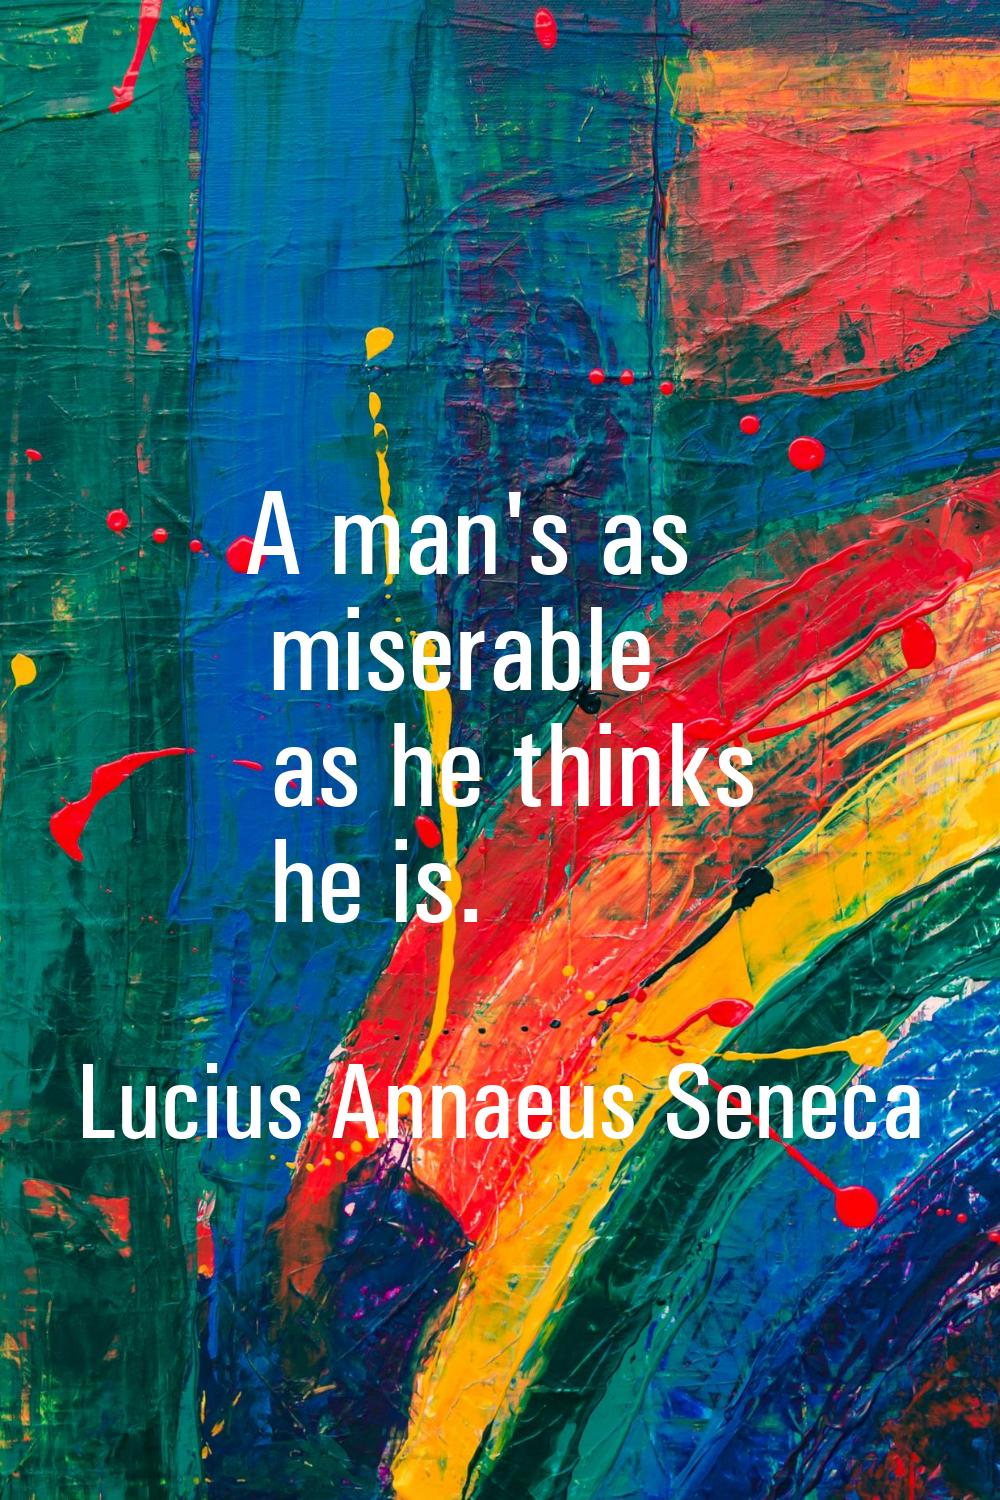 A man's as miserable as he thinks he is.